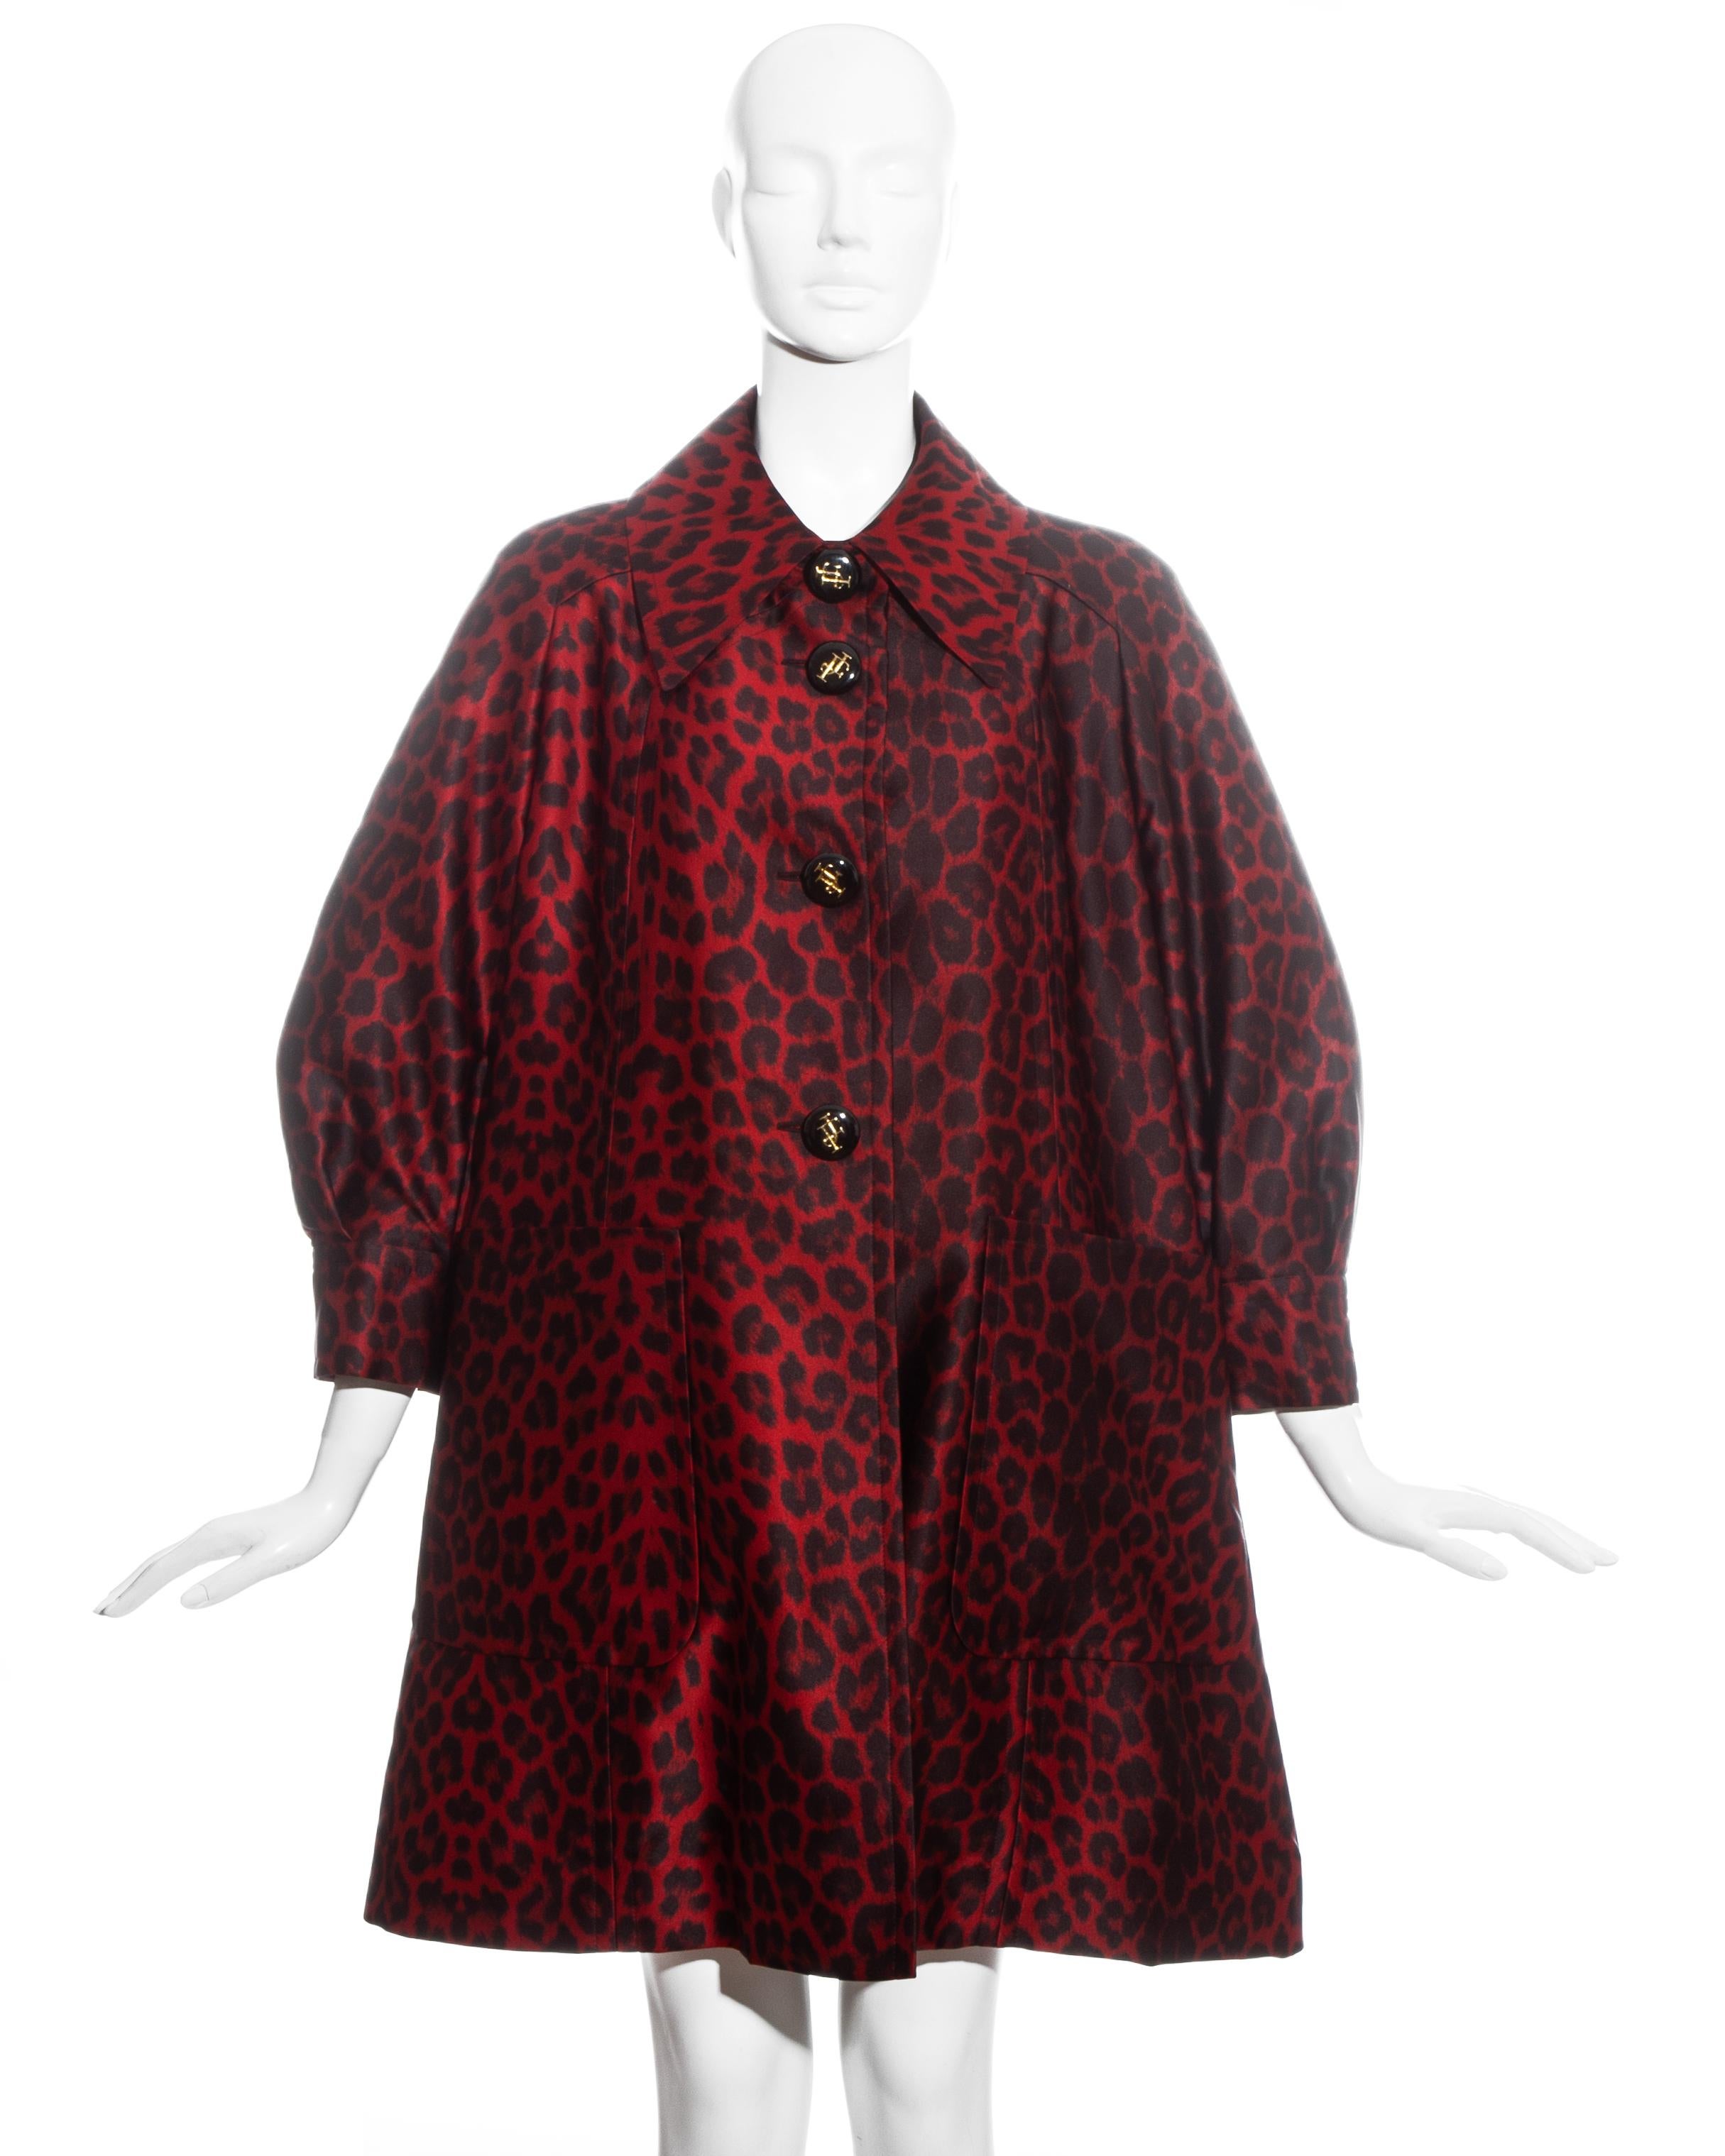 Jacques Fath red leopard print silk evening opera coat with quilted interior and large button fastenings.

Fall-Winter 1992